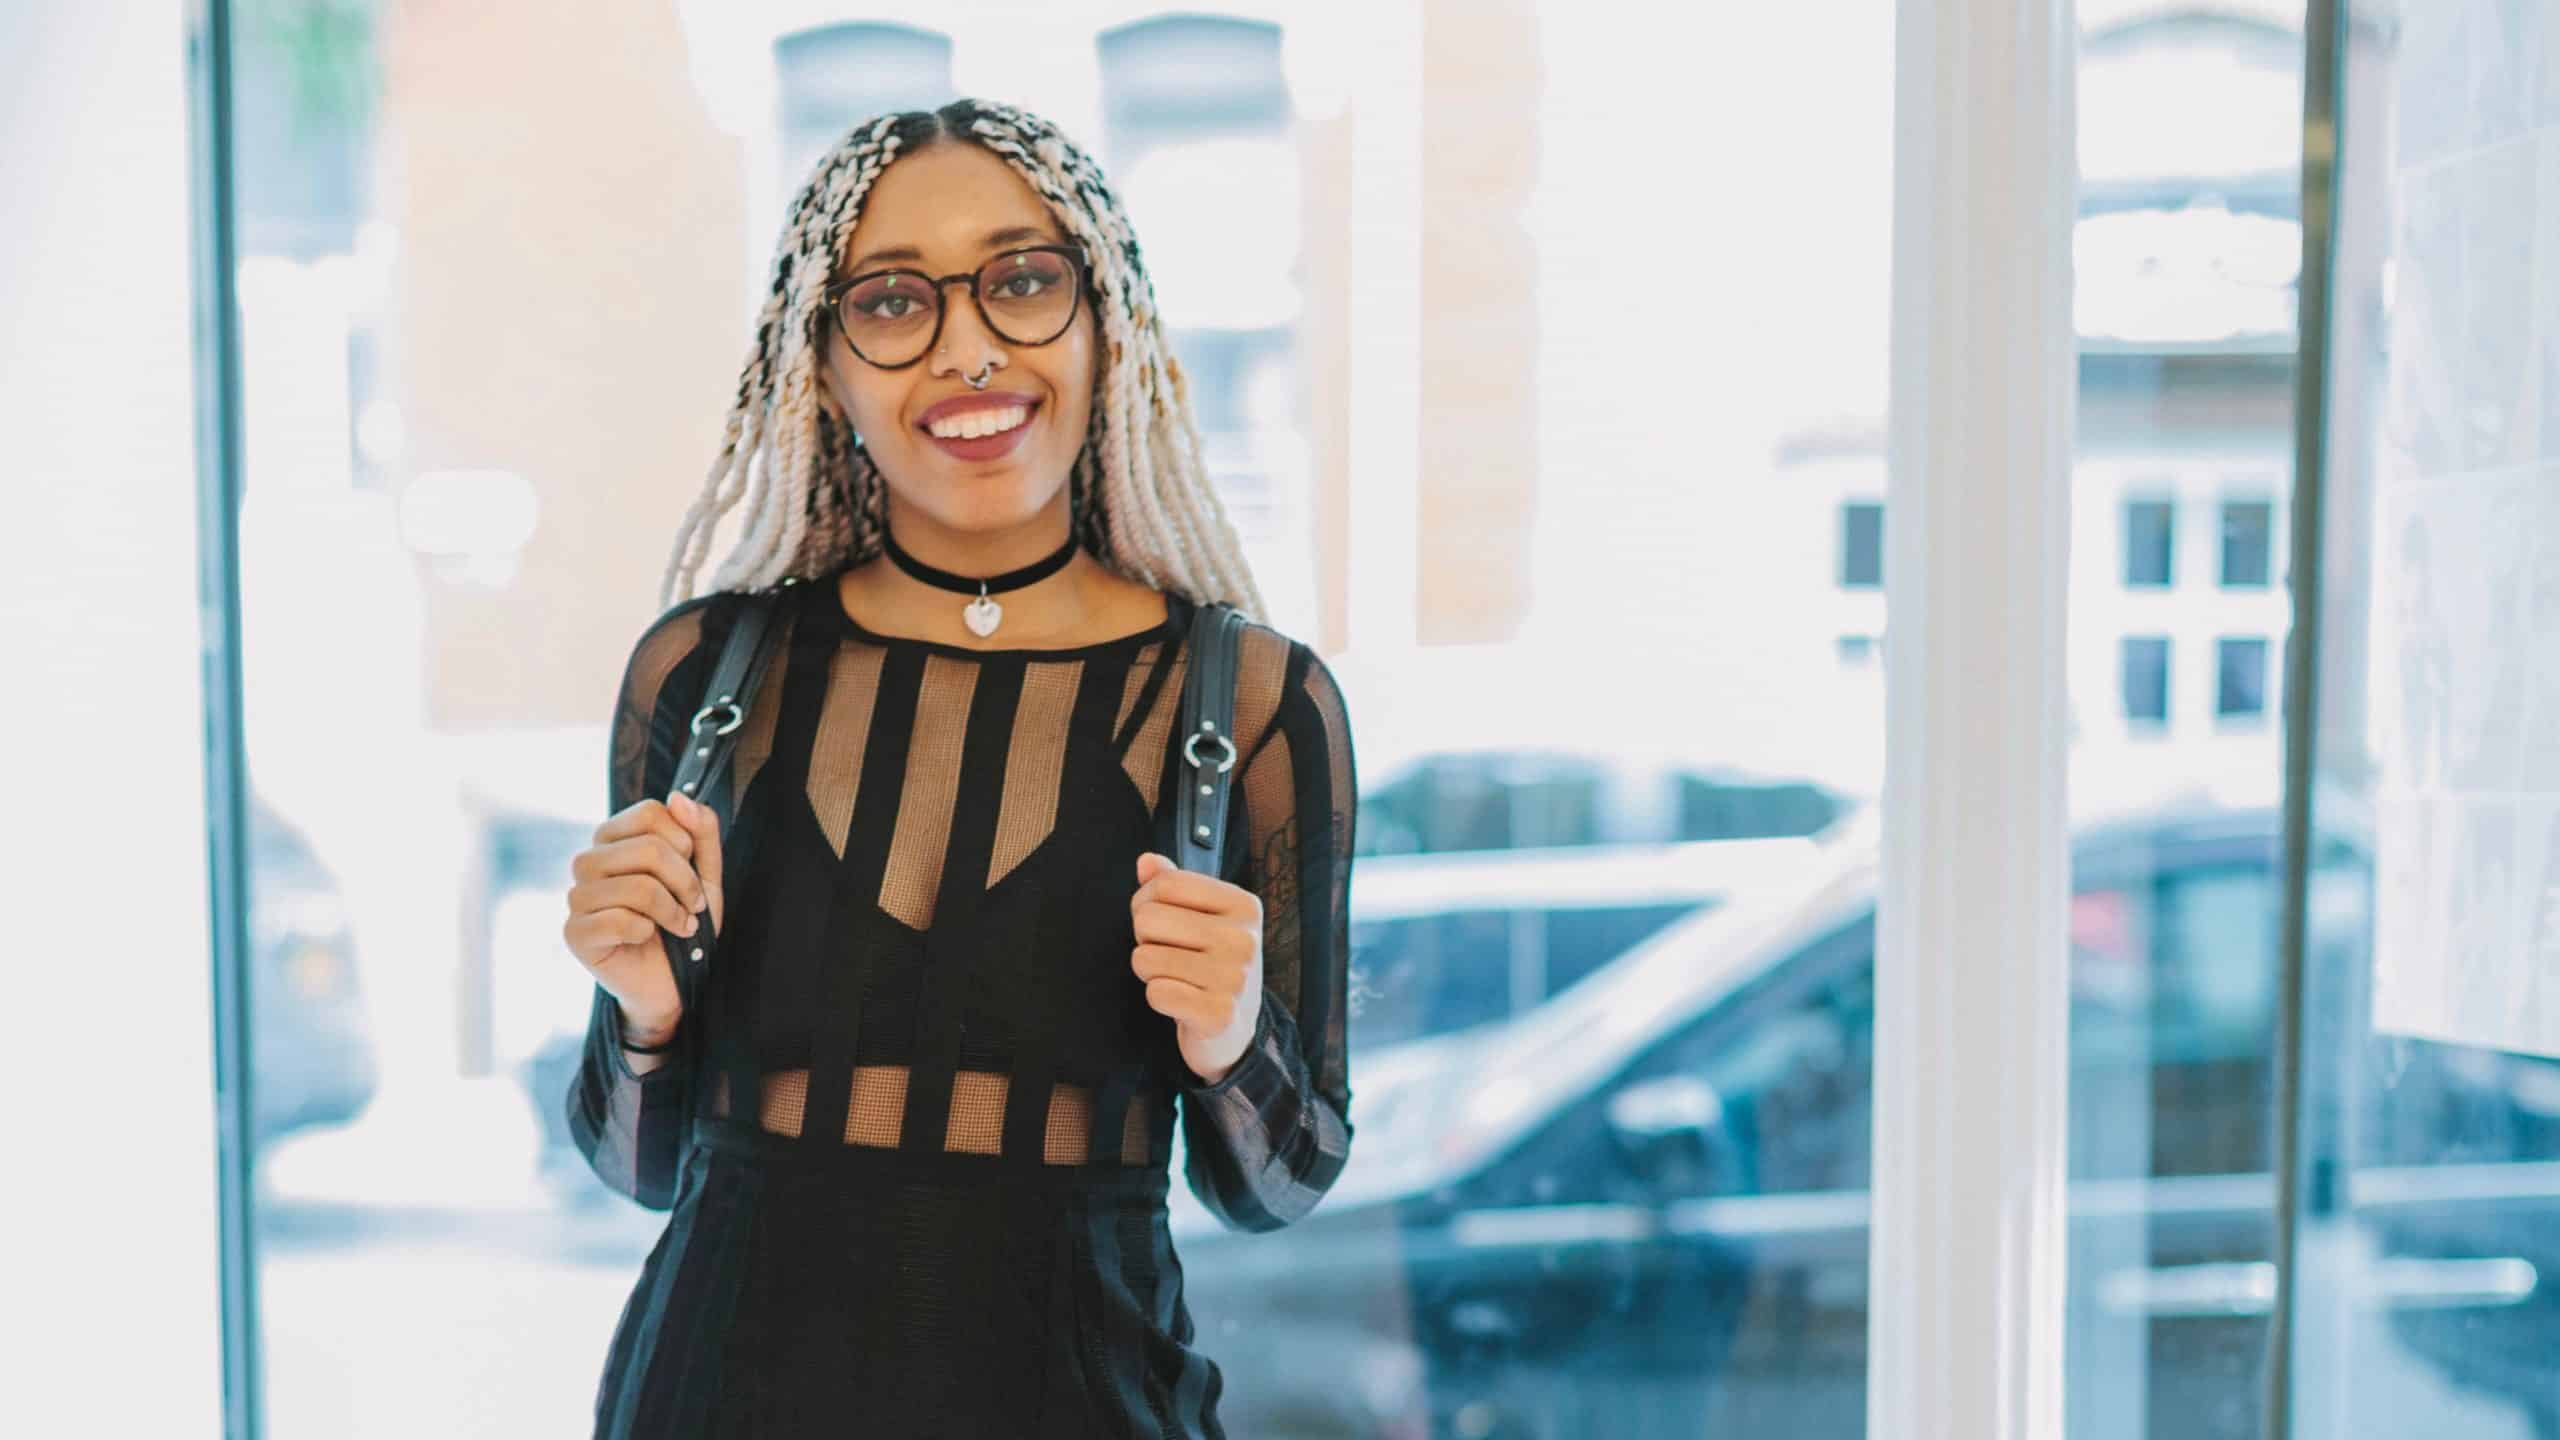 See How This Beauty Punk Rocker Connects With Her Customers Pop-Up Style | Peerspace